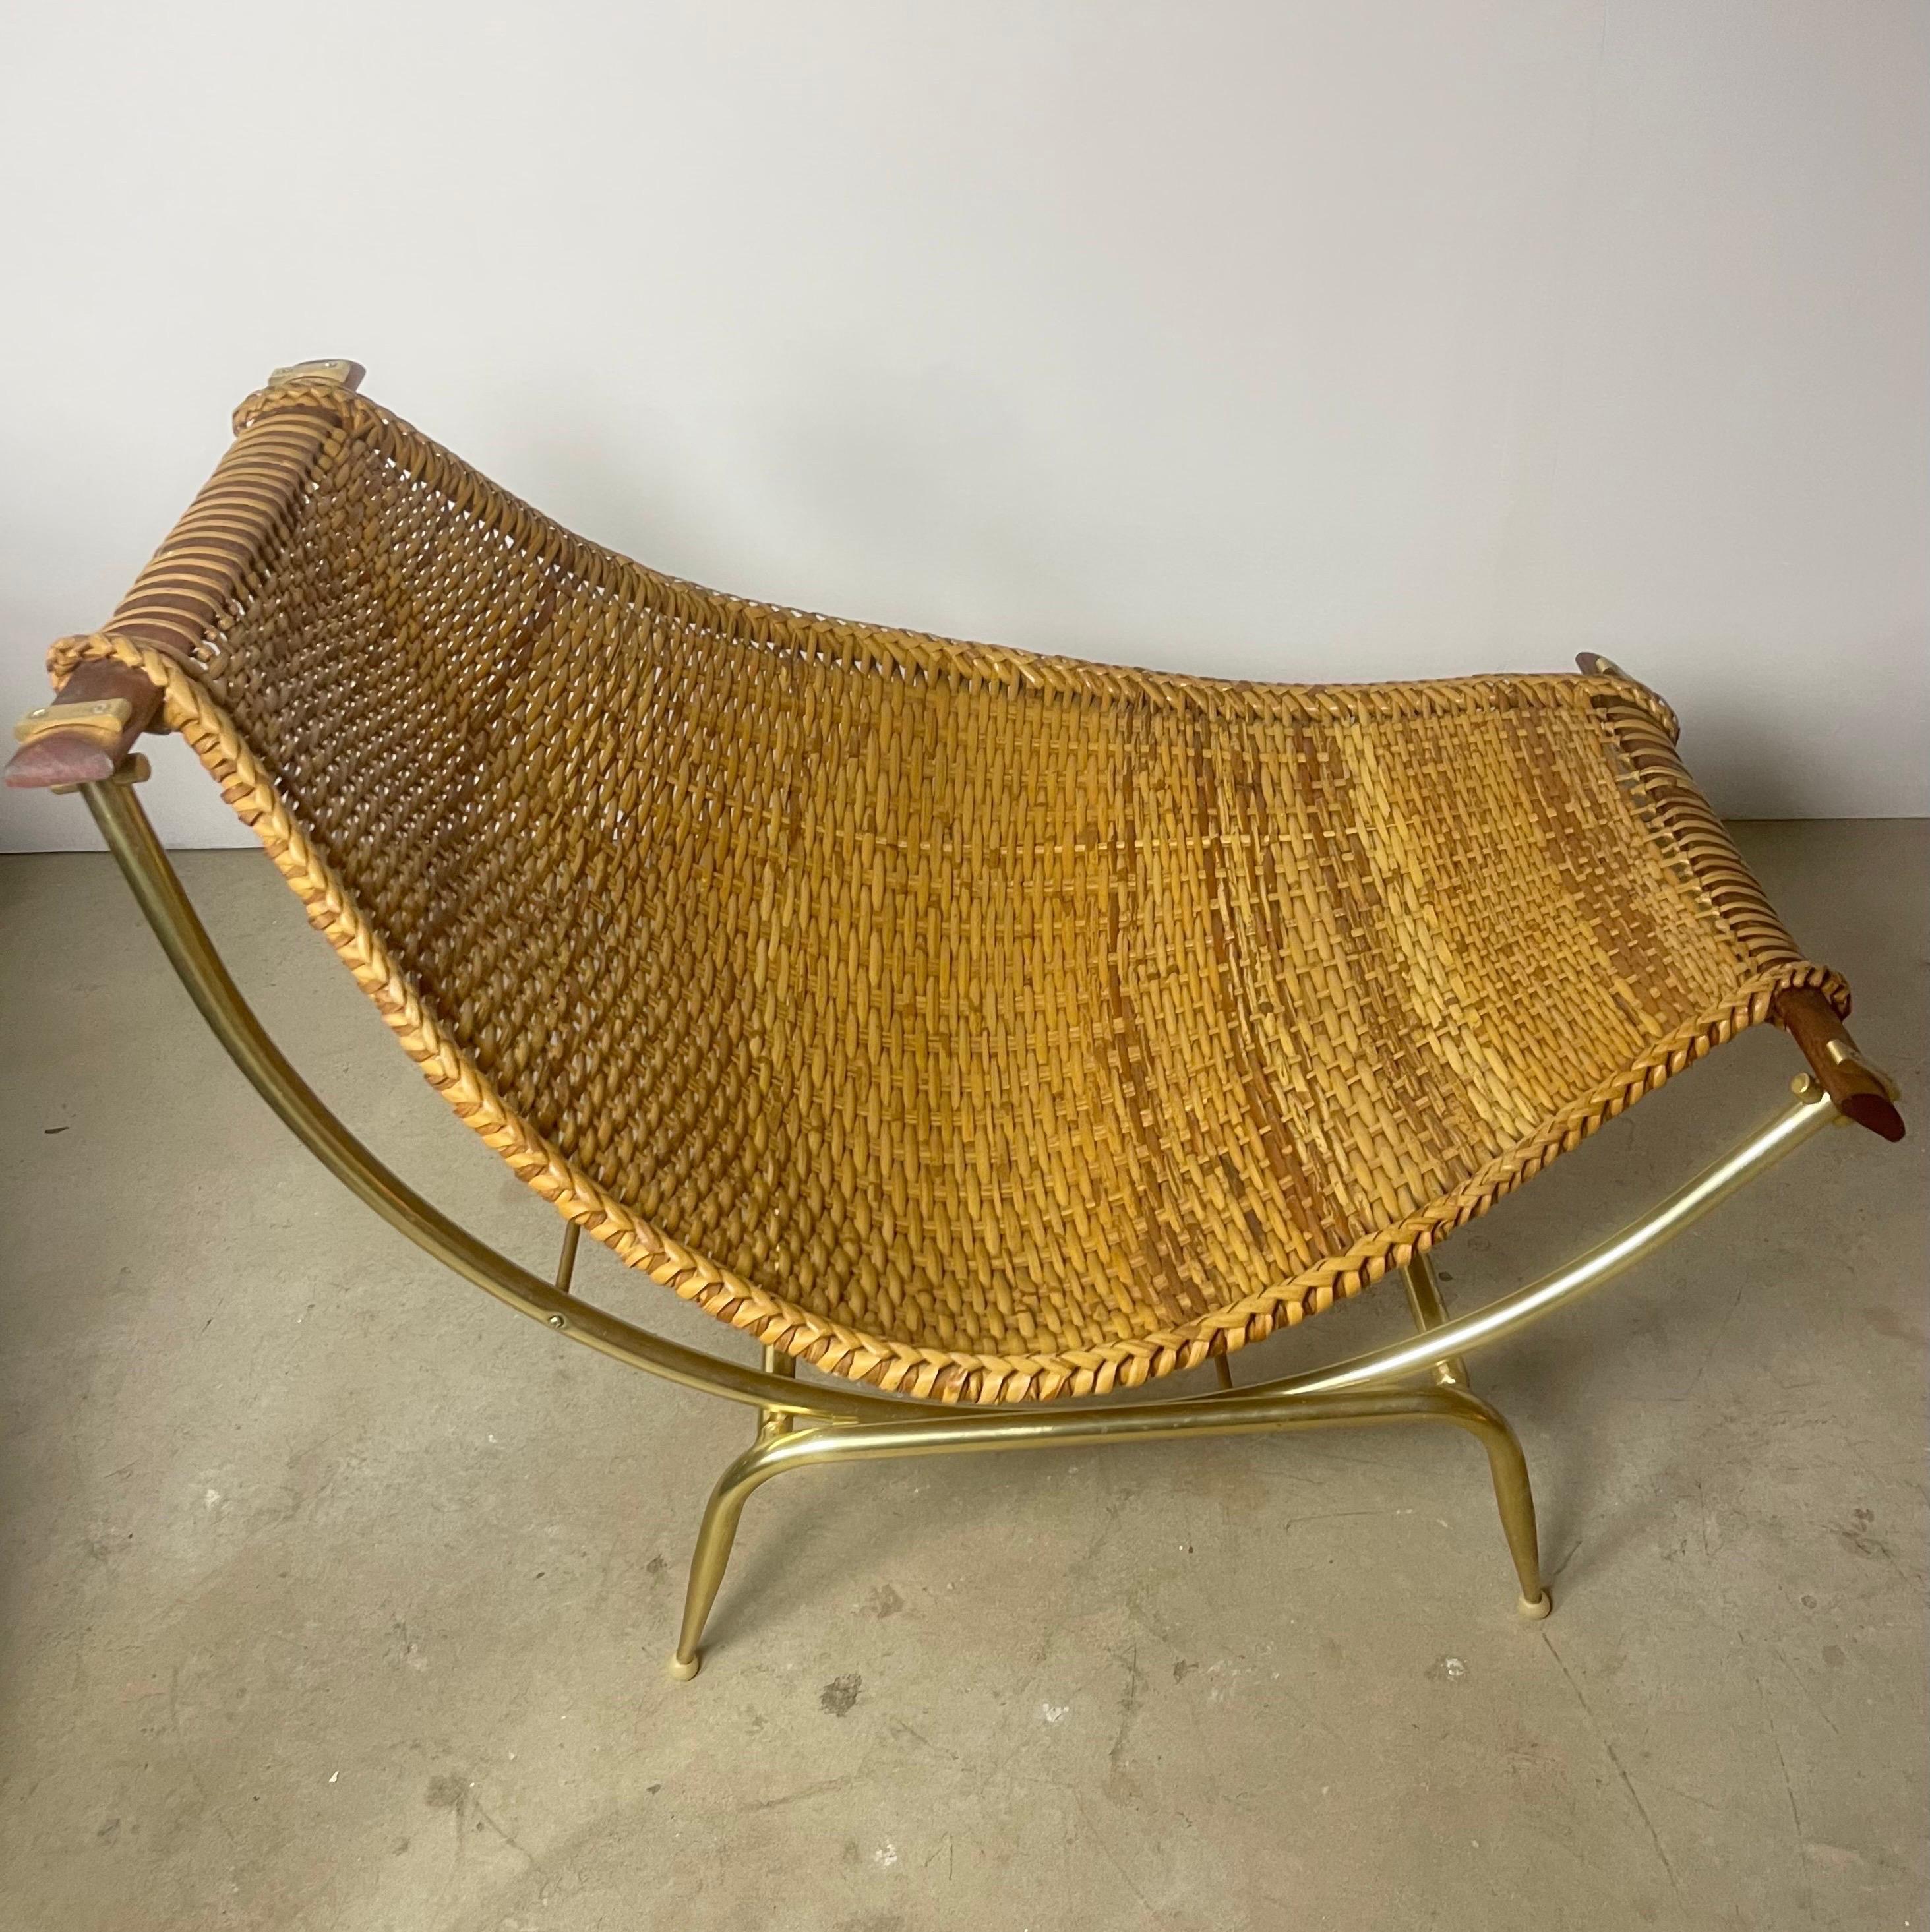 Crafted from high-quality rattan and featuring a unique fish-shaped design, this lounge is a true statement piece.

This rattan fish chaise lounge is in great condition, having been well-preserved over the years. The rattan is still strong and the